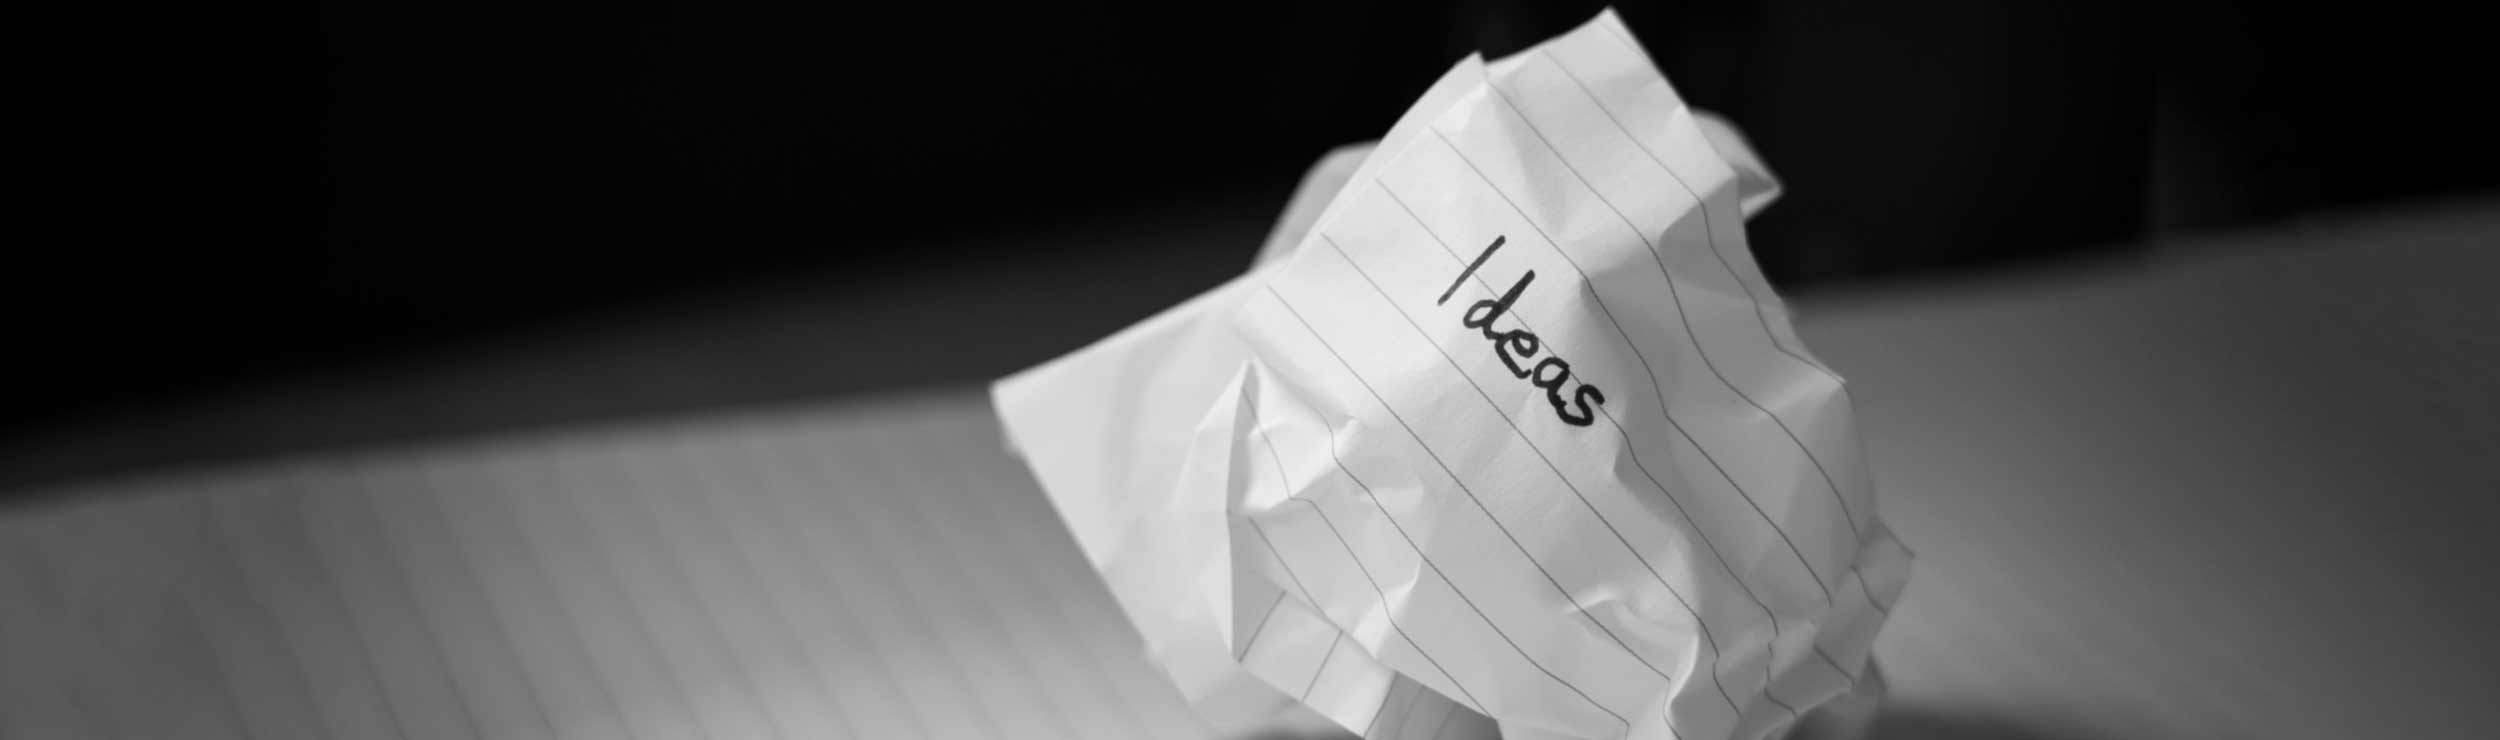 A screwed up ball of paper with the word "ideas" written on it